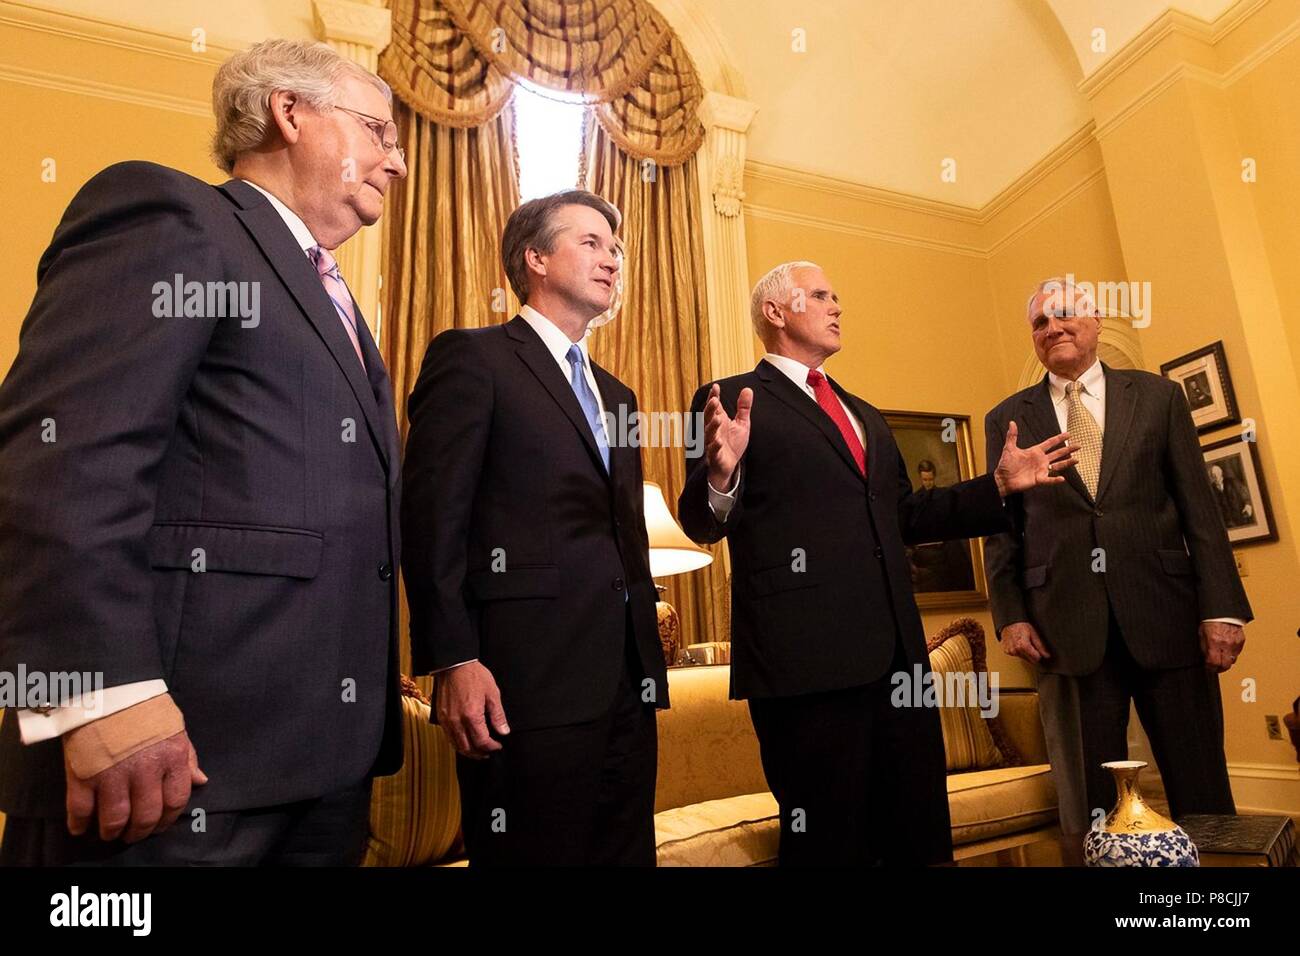 Washington, US. 10th July 2018. U.S Vice President Mike Pence, 2nd right, speaks to the media as he introduces Supreme Court nominee Brett Kavanaugh, 2nd left, to Senate Majority Leader Mitch McConnell, left, July 10, 2018 in Washington, DC. Former Sen. Jon Kyl of Arizona looks on from the right. Credit: Planetpix/Alamy Live News Stock Photo